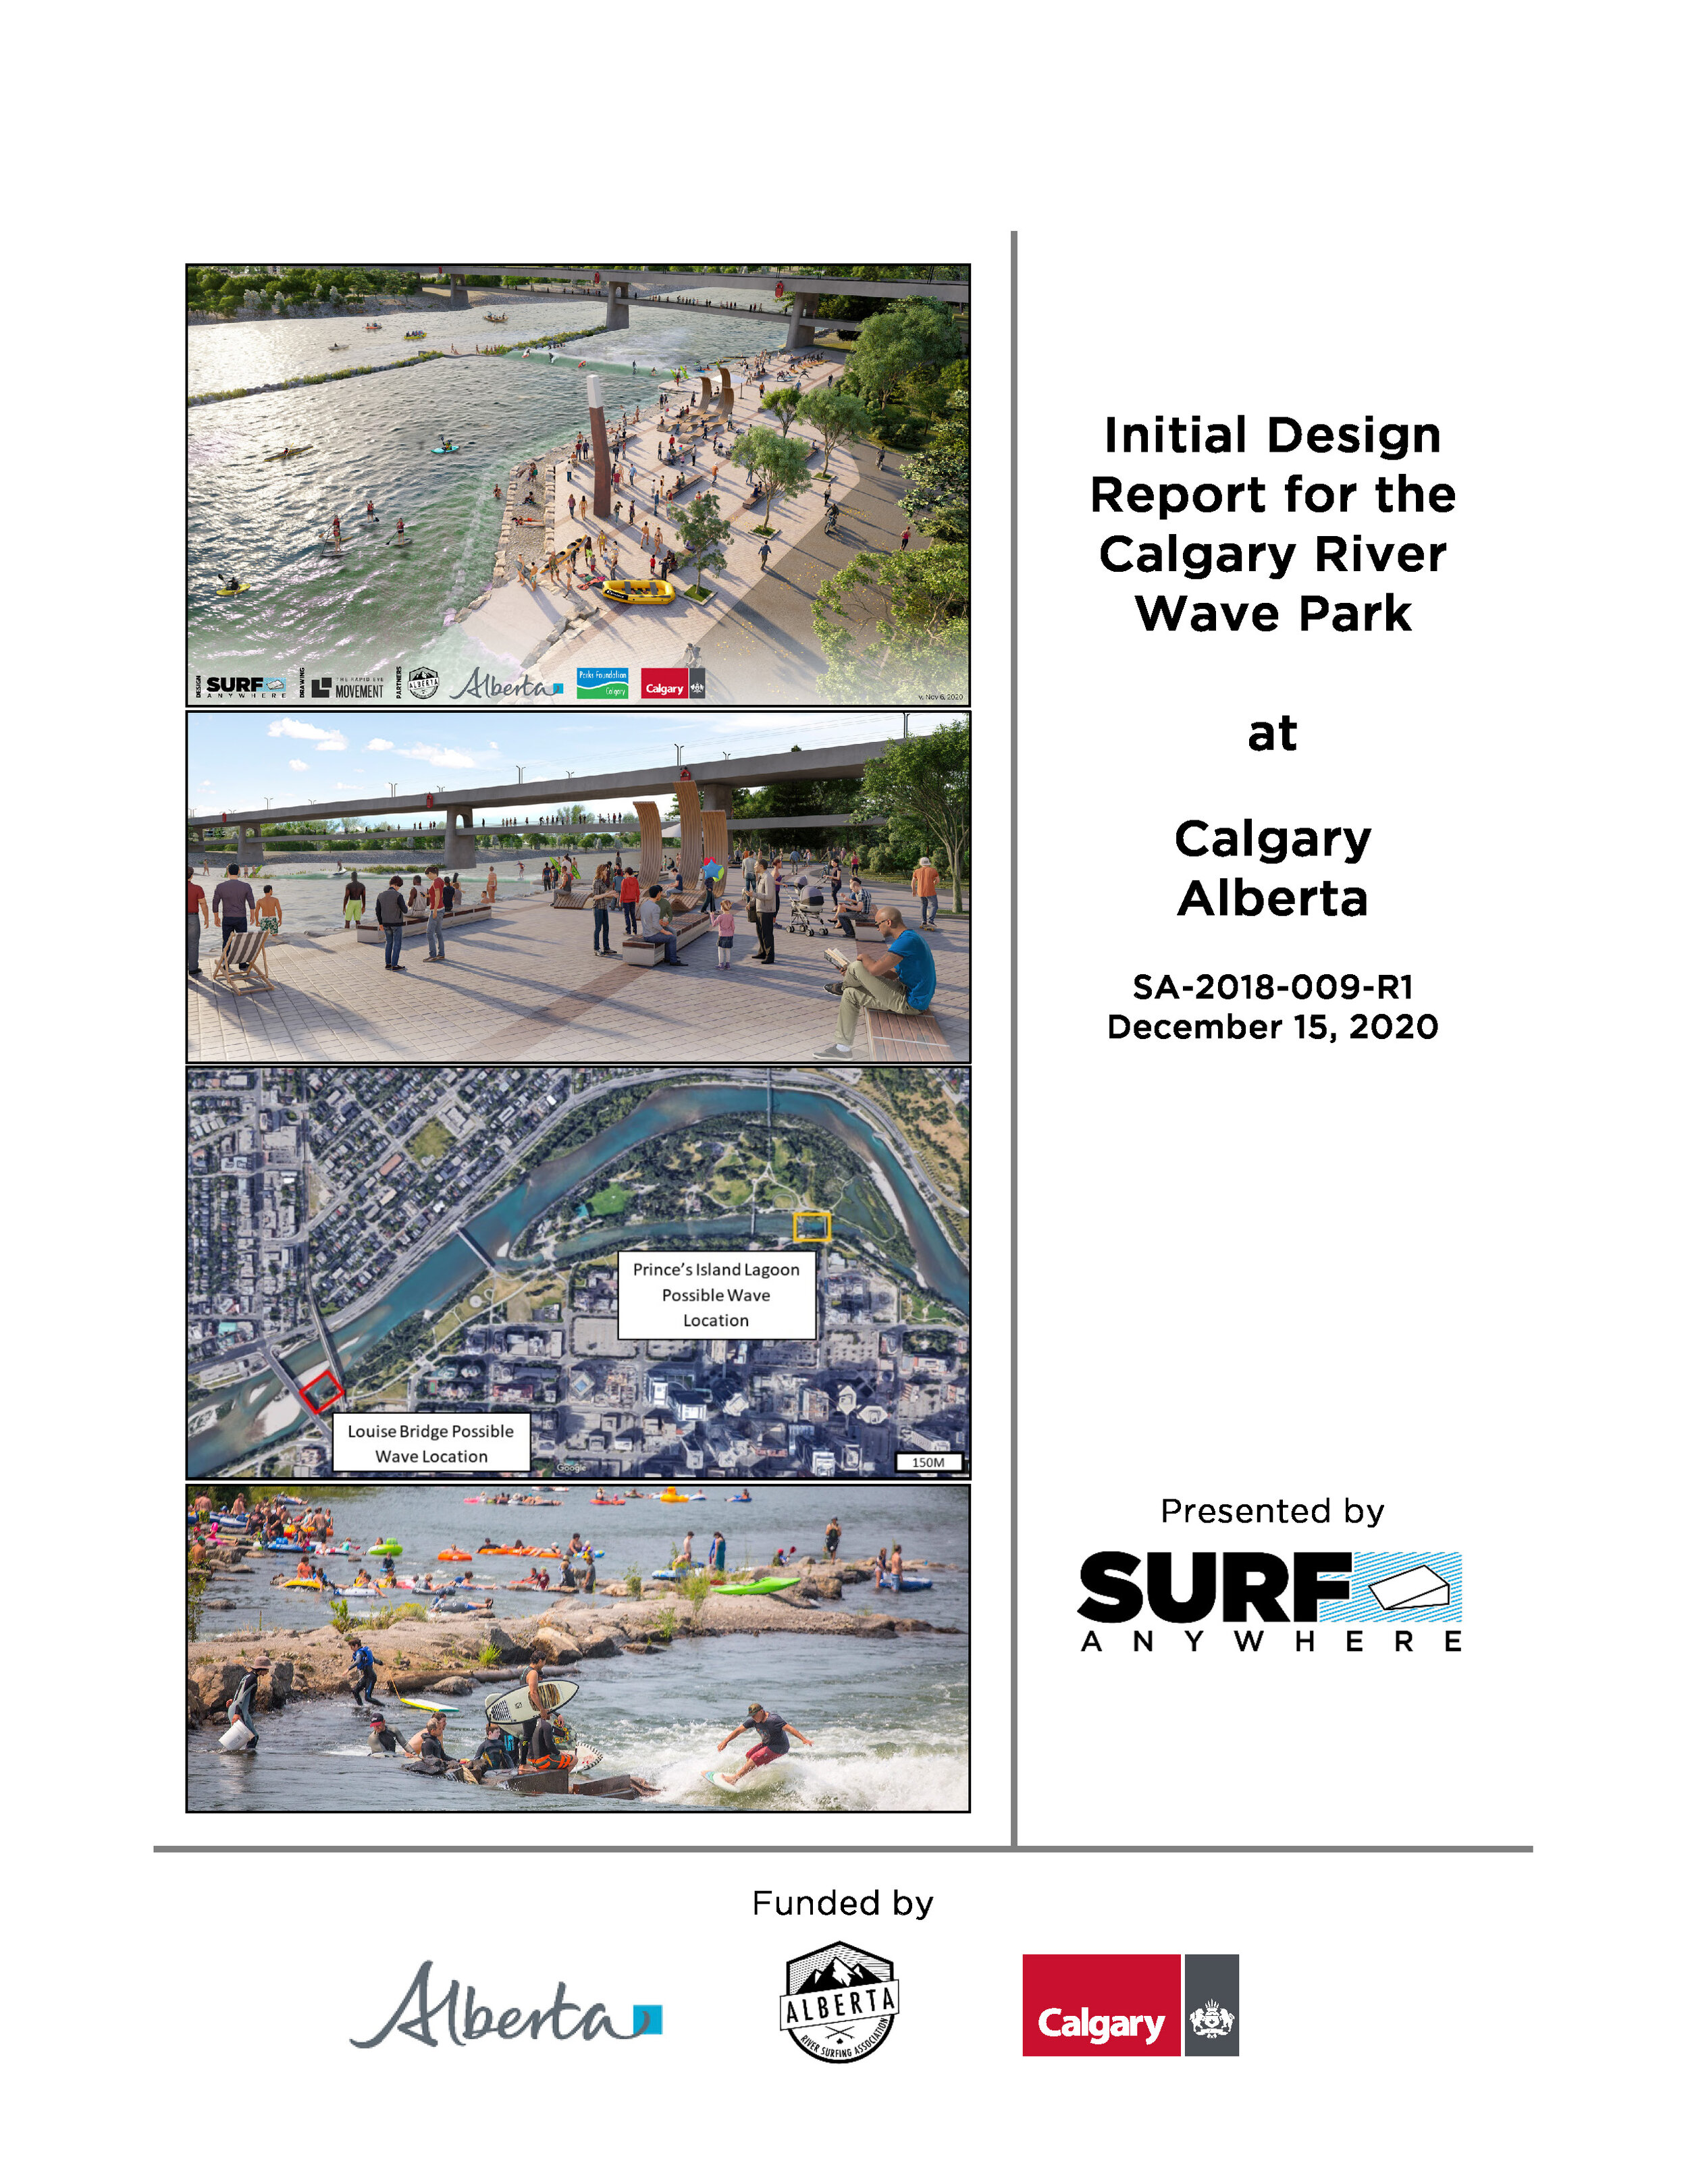 Initial Design Report for Calgary River Wave Park (SA-2018-009-R1) 2020 12 15_Page_001.jpg